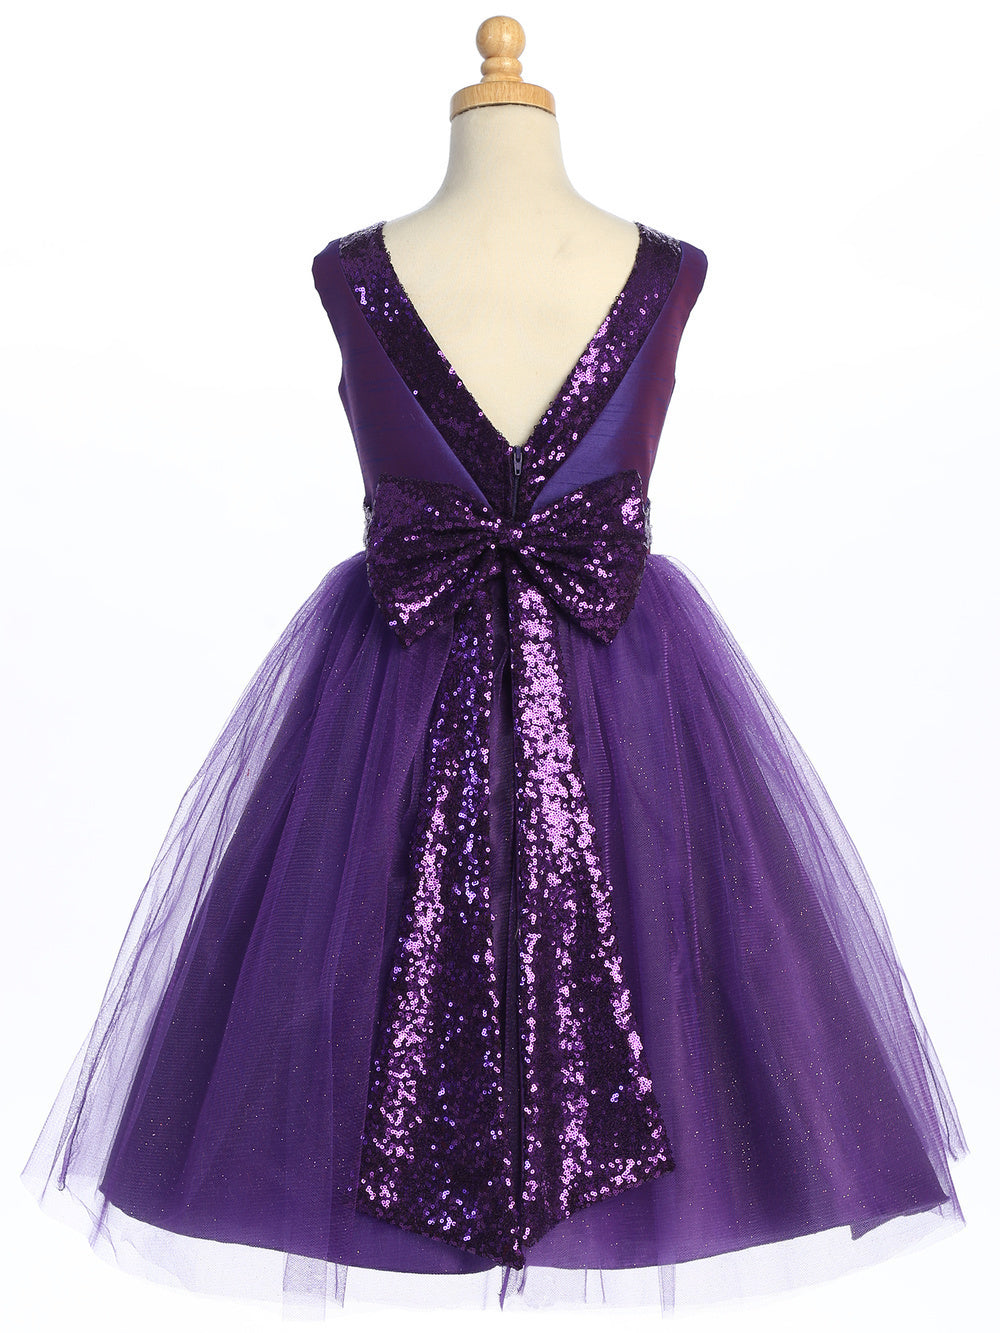 Flower girl enchants in a sequined purple shantung dress with sparkling tulle.